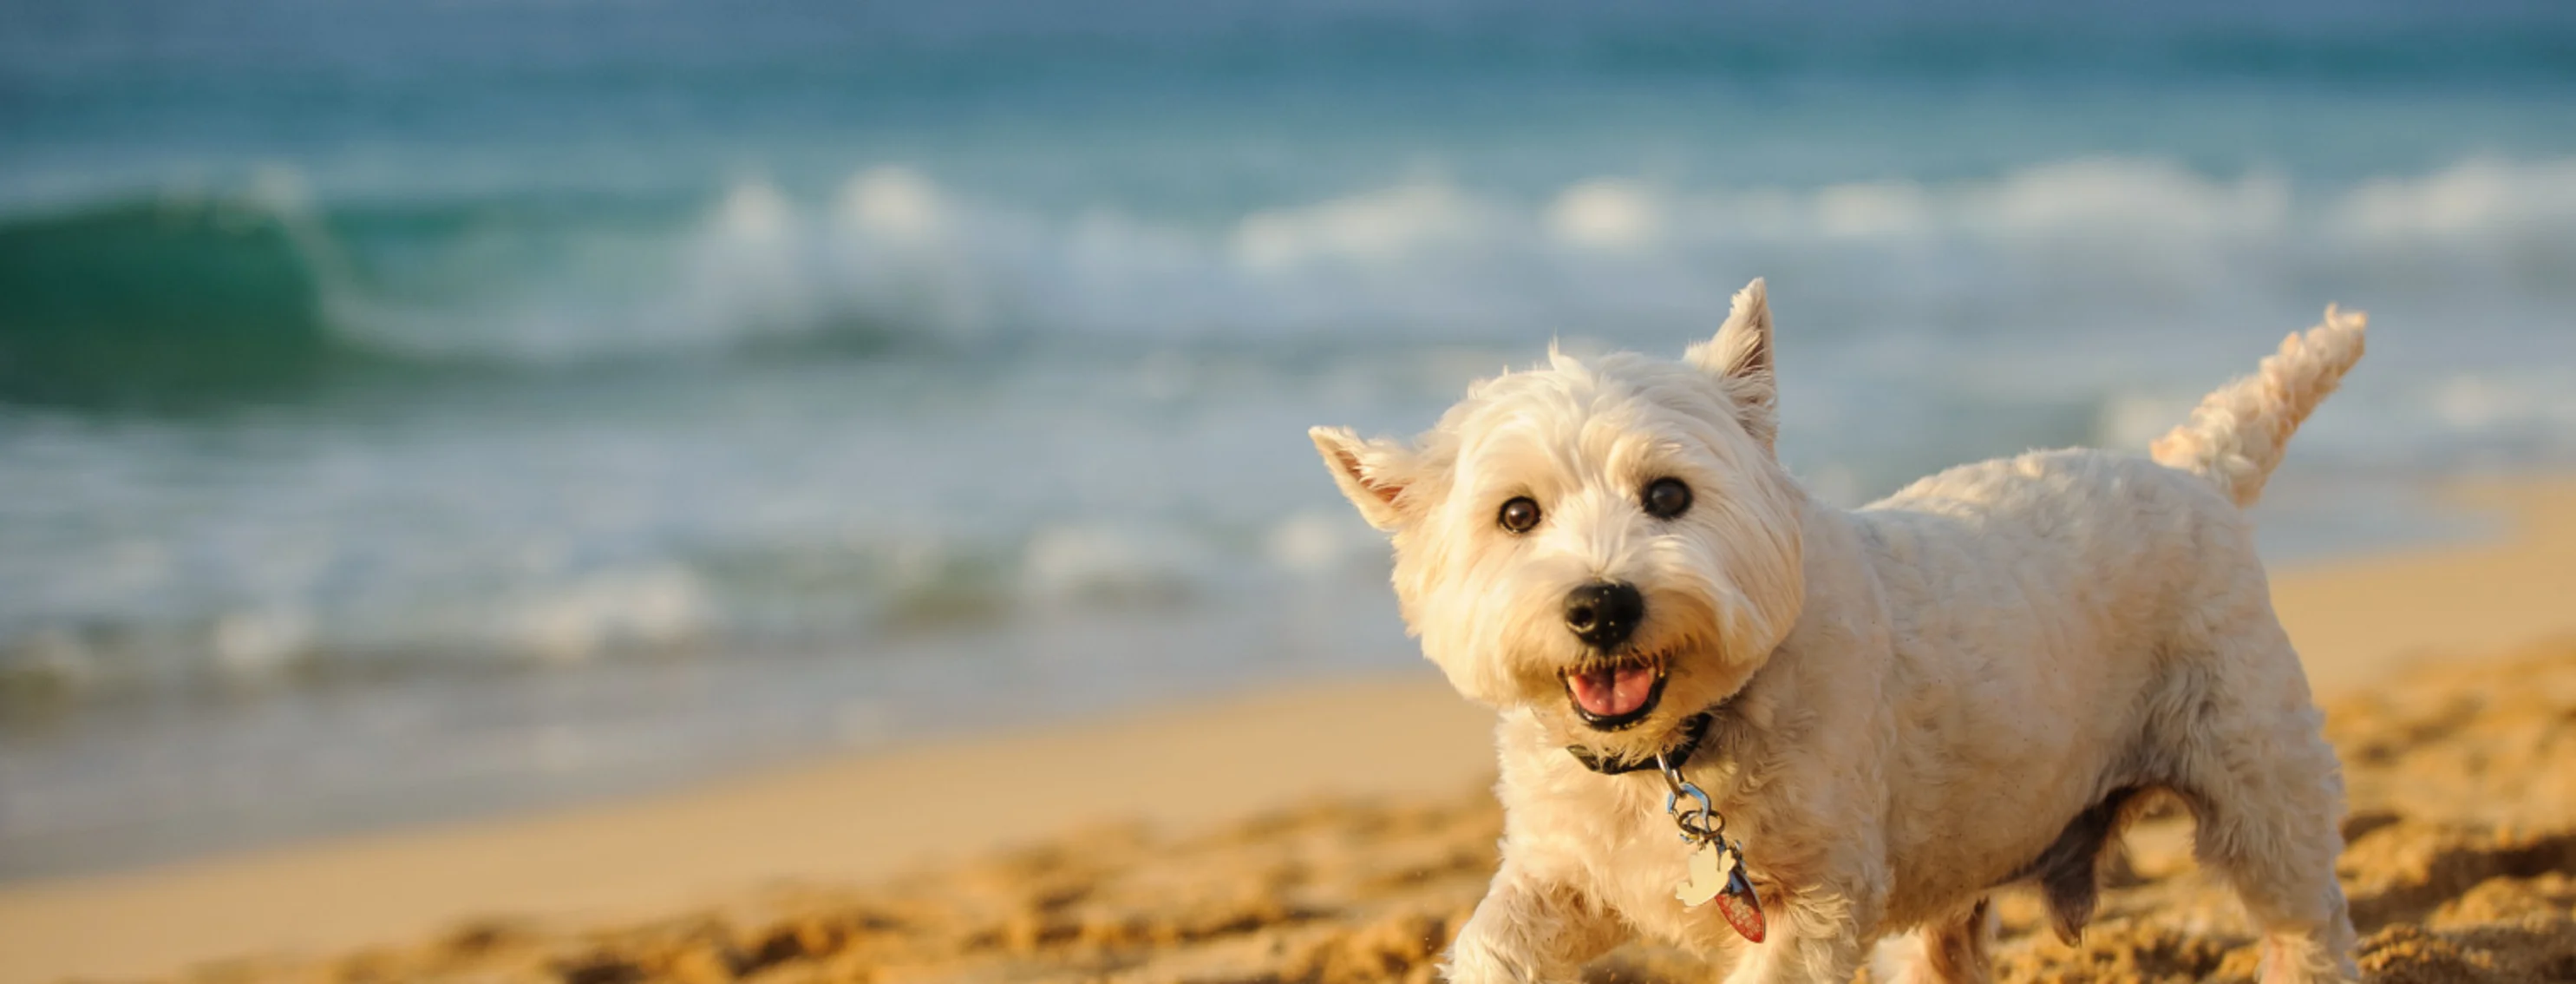 Small white dog walking on sandy beach with ocean in the background